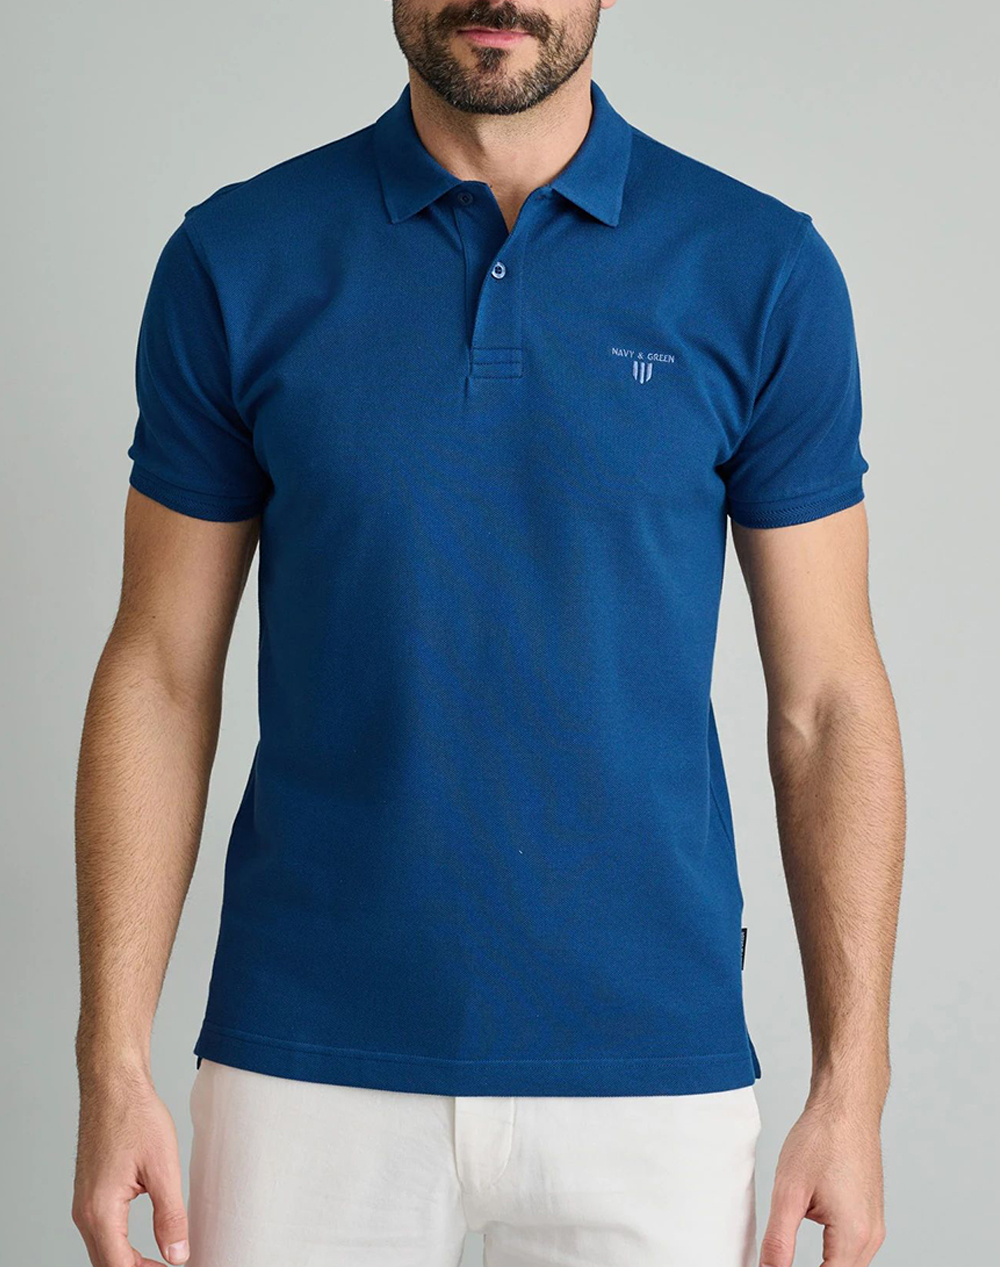 NAVY&GREEN POLO ΜΠΛΟΥΖΑΚΙ-YOUNG LINE 24EY.007/PL/YL-Atlantic Blue OceanBlue